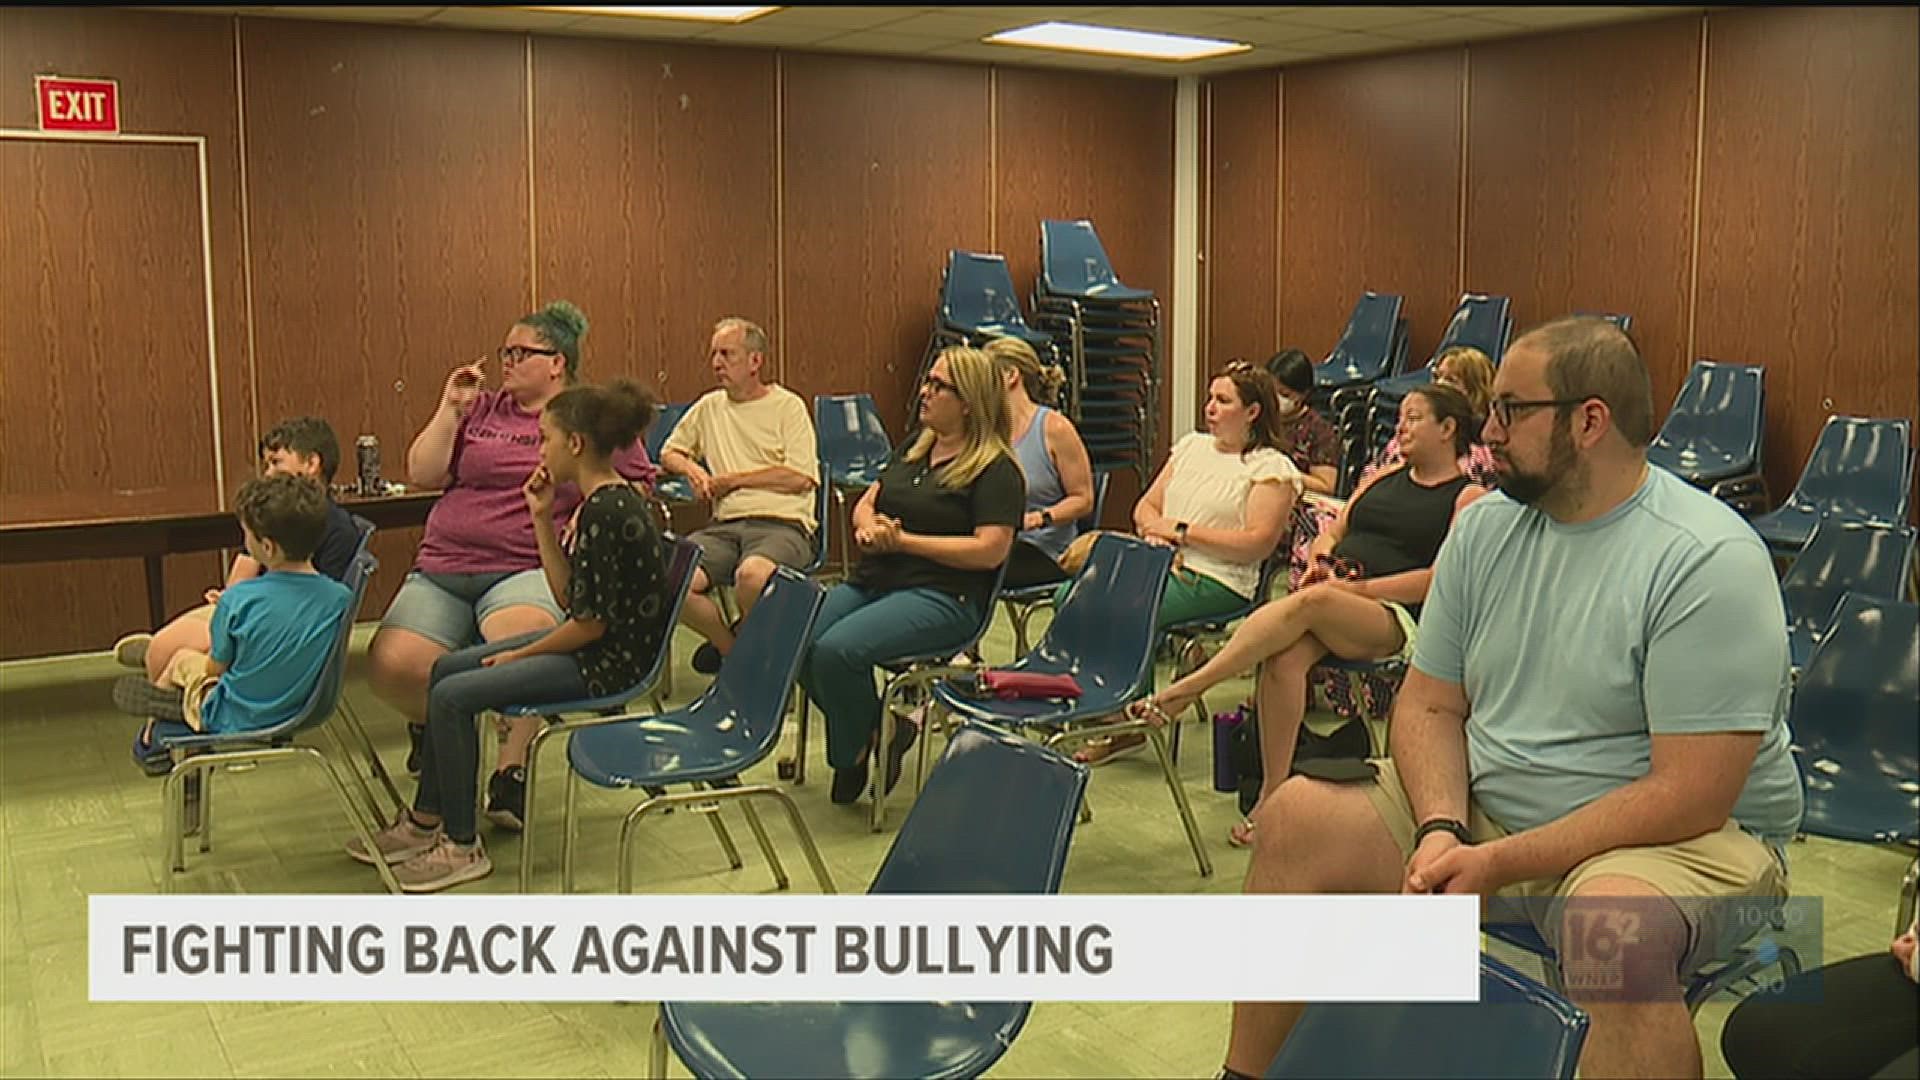 A rise in fights and bullying at intermediate schools within the Scranton School District prompted this community effort.